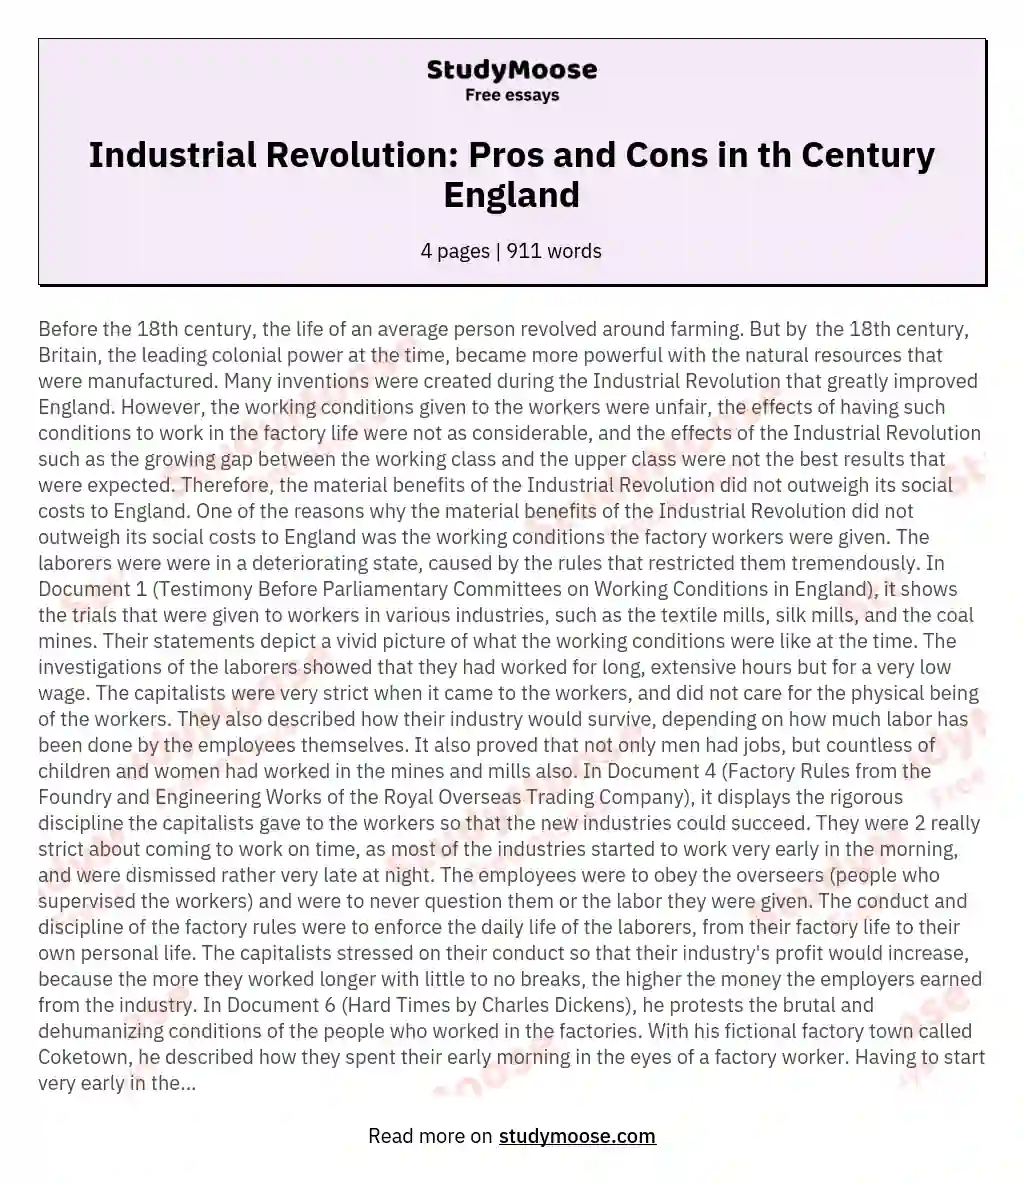 Industrial Revolution: Pros and Cons in th Century England essay